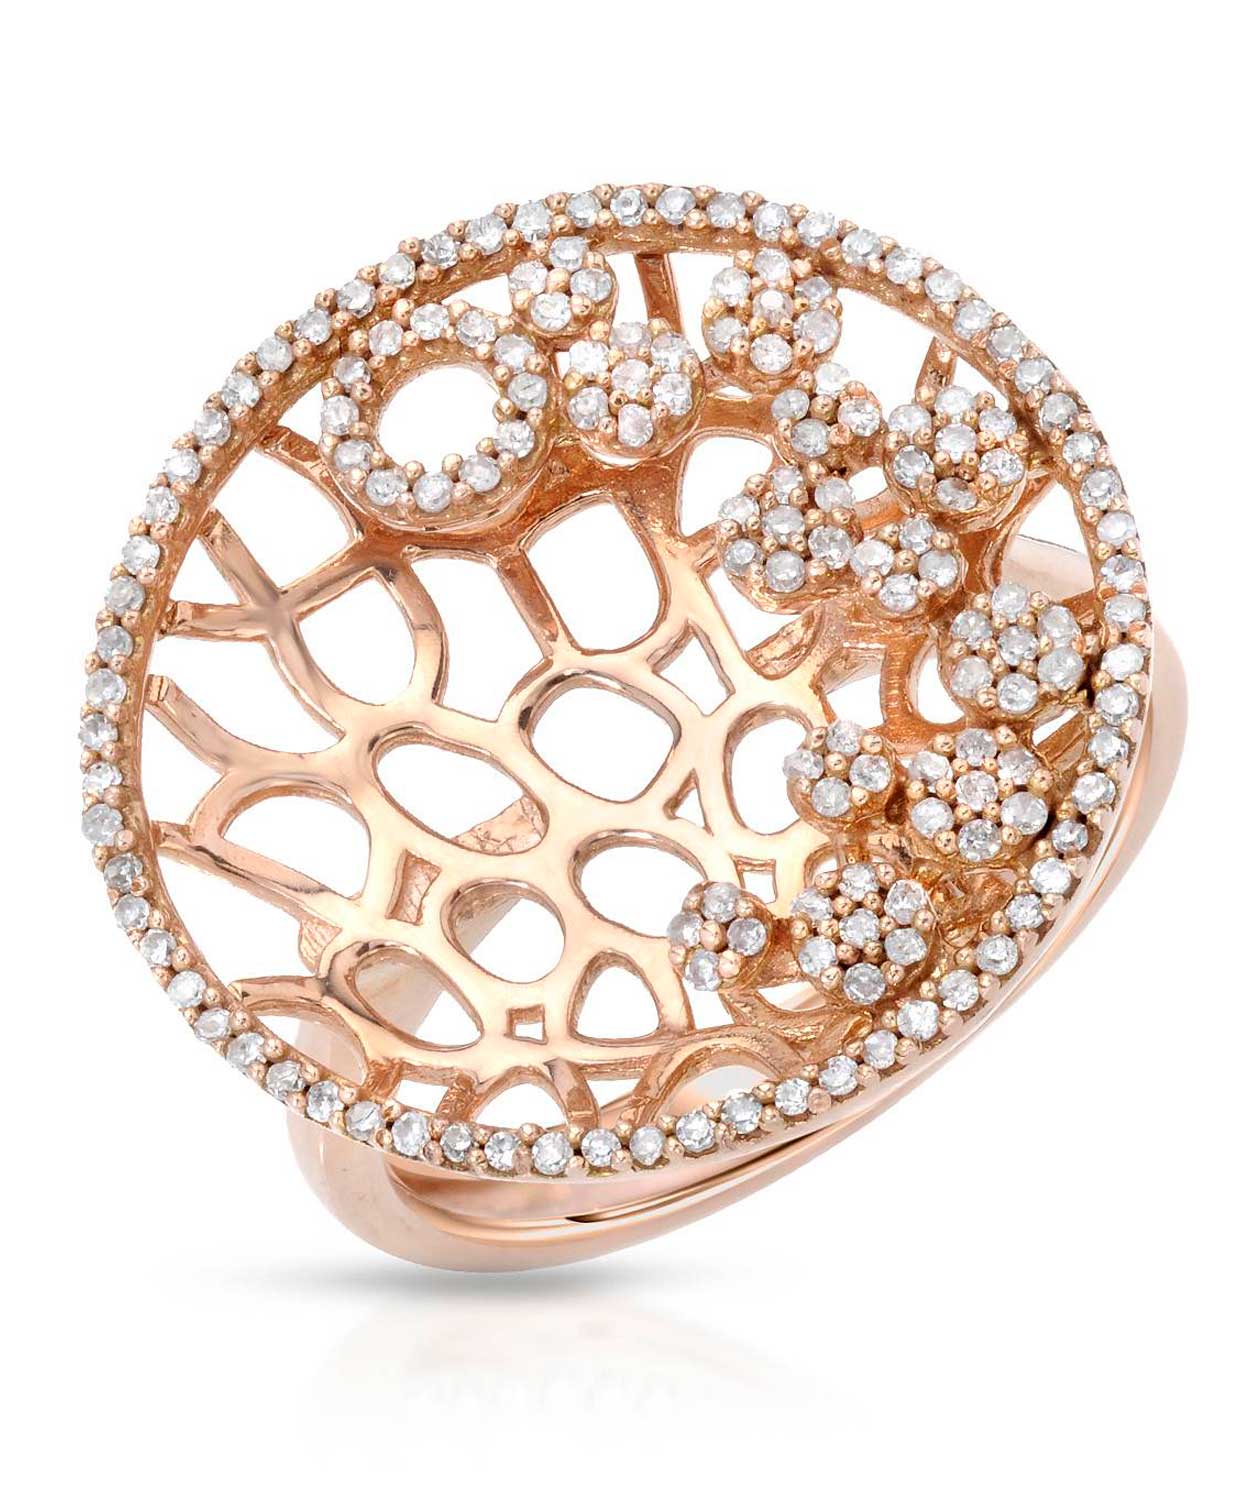 Allure Collection 0.55 ctw Diamond 14k Gold Elegant Cocktail Ring View 1